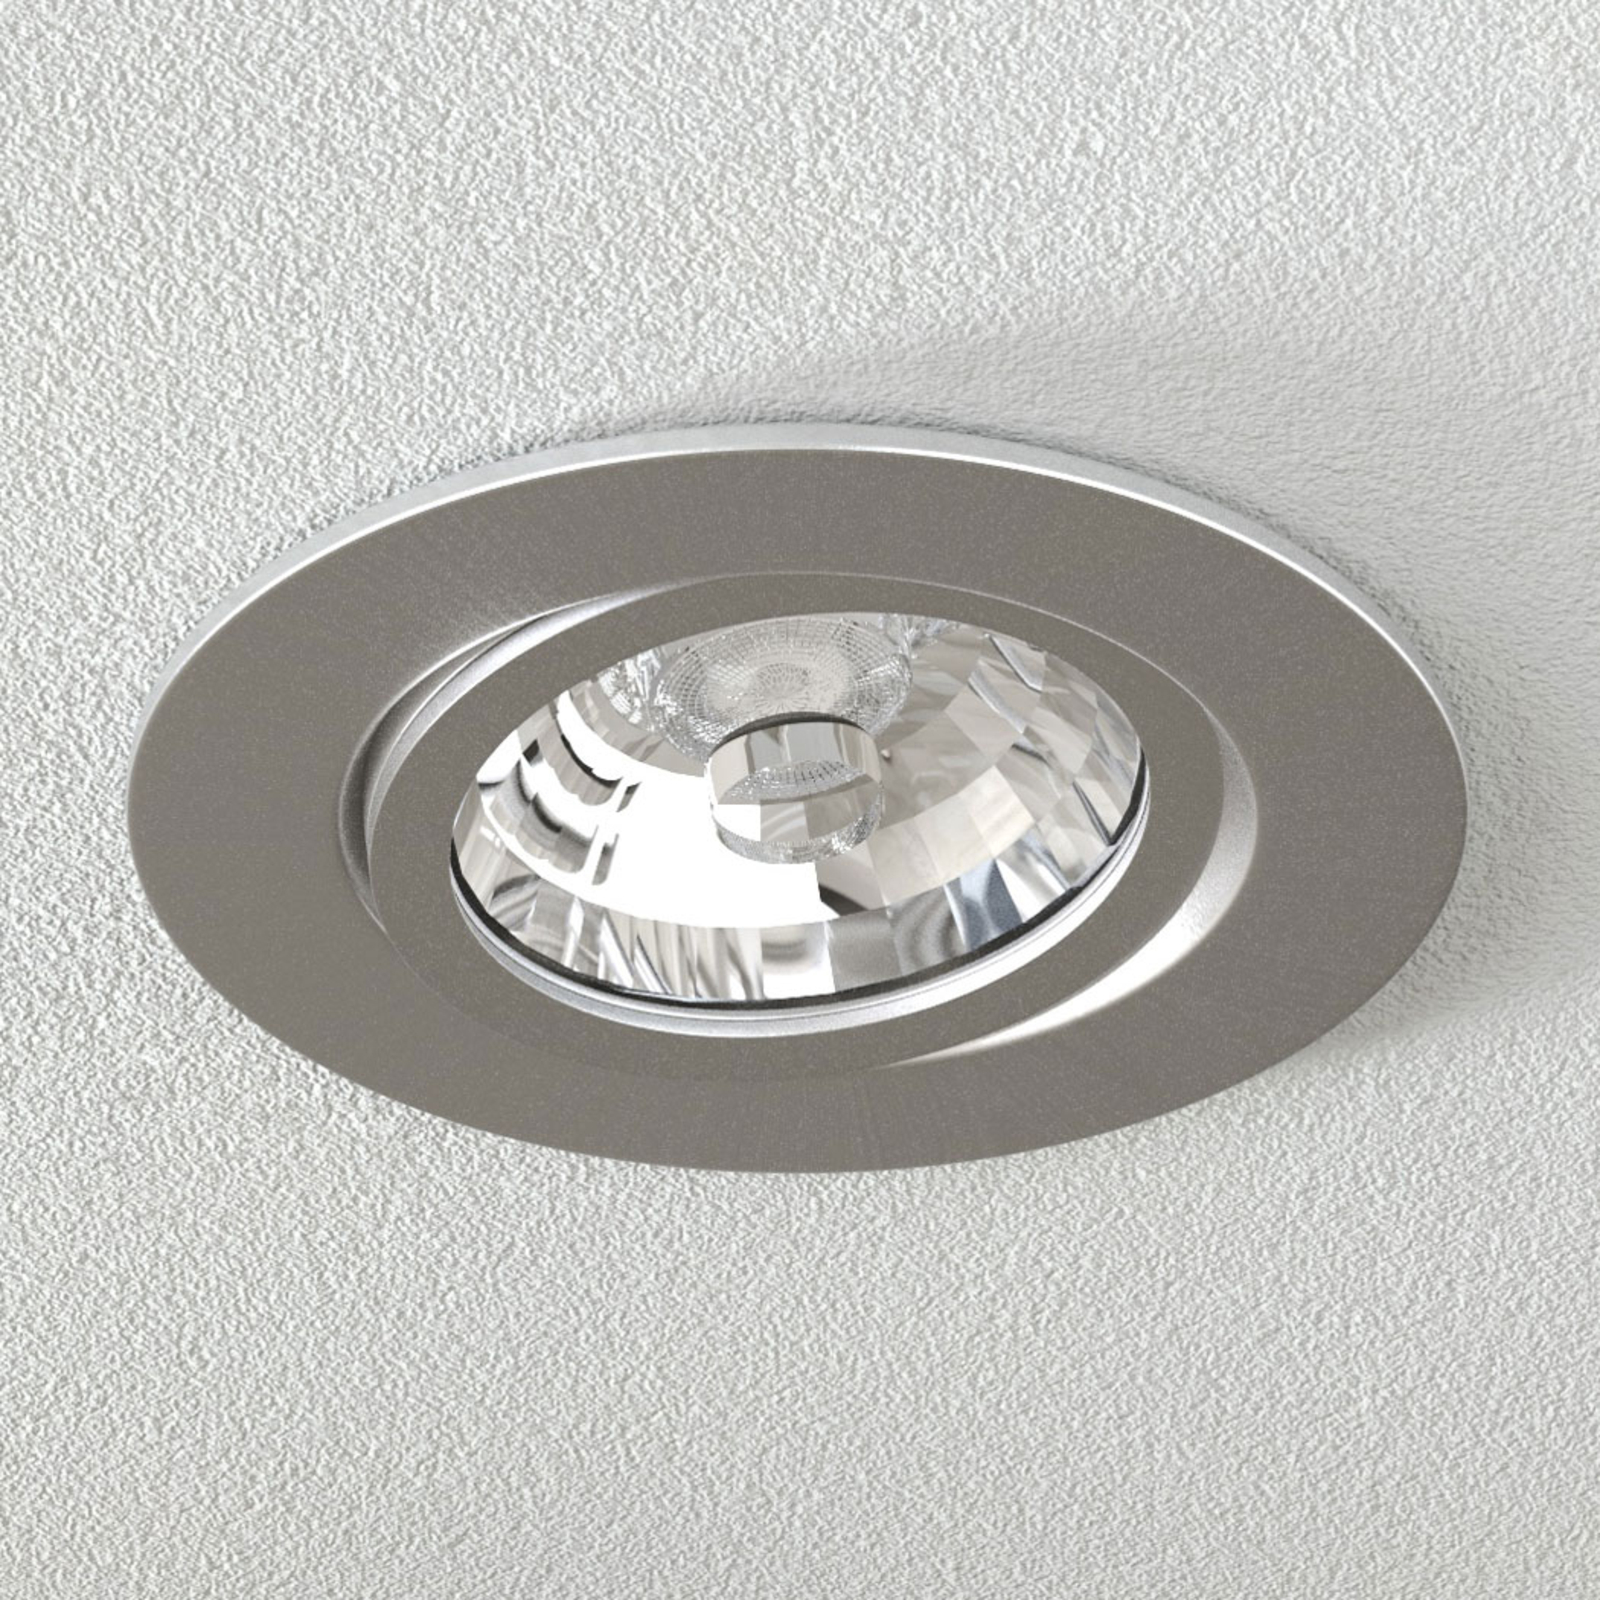 LED recessed light Rico 6.5 W brushed steel